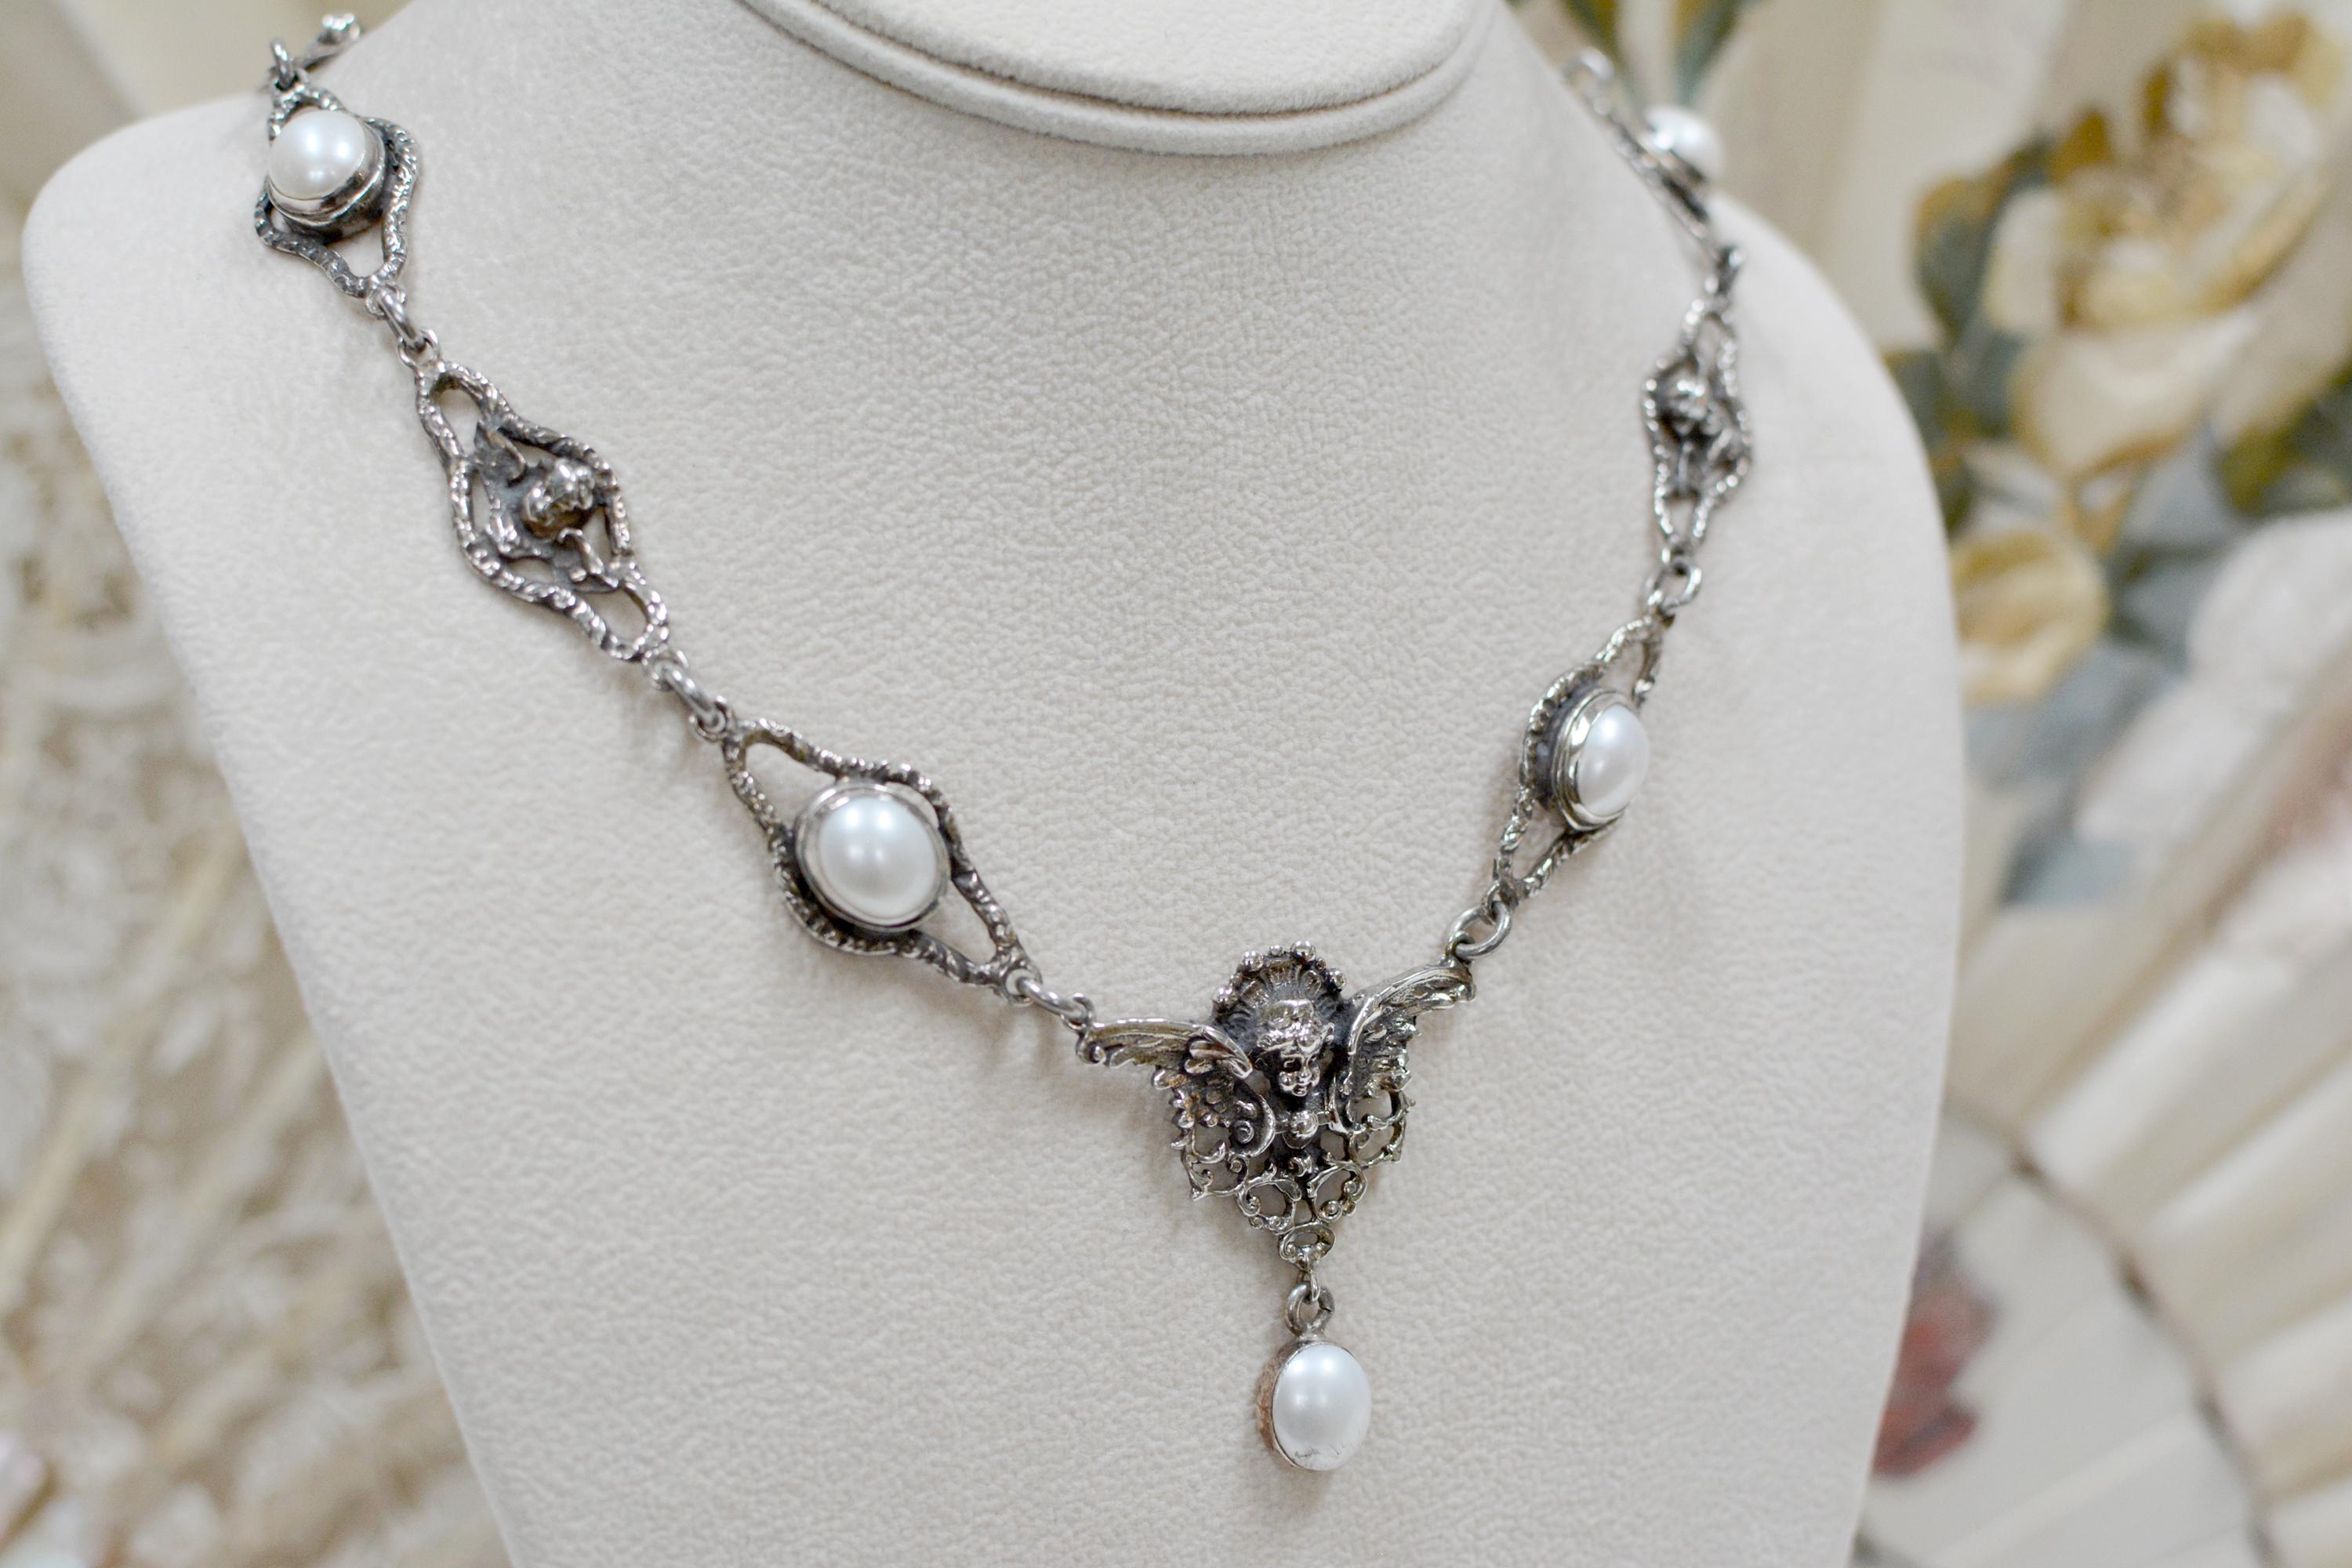 Women's or Men's Jill Garber Collection Figural Angel’s Drop Necklace with Freshwater Pearls